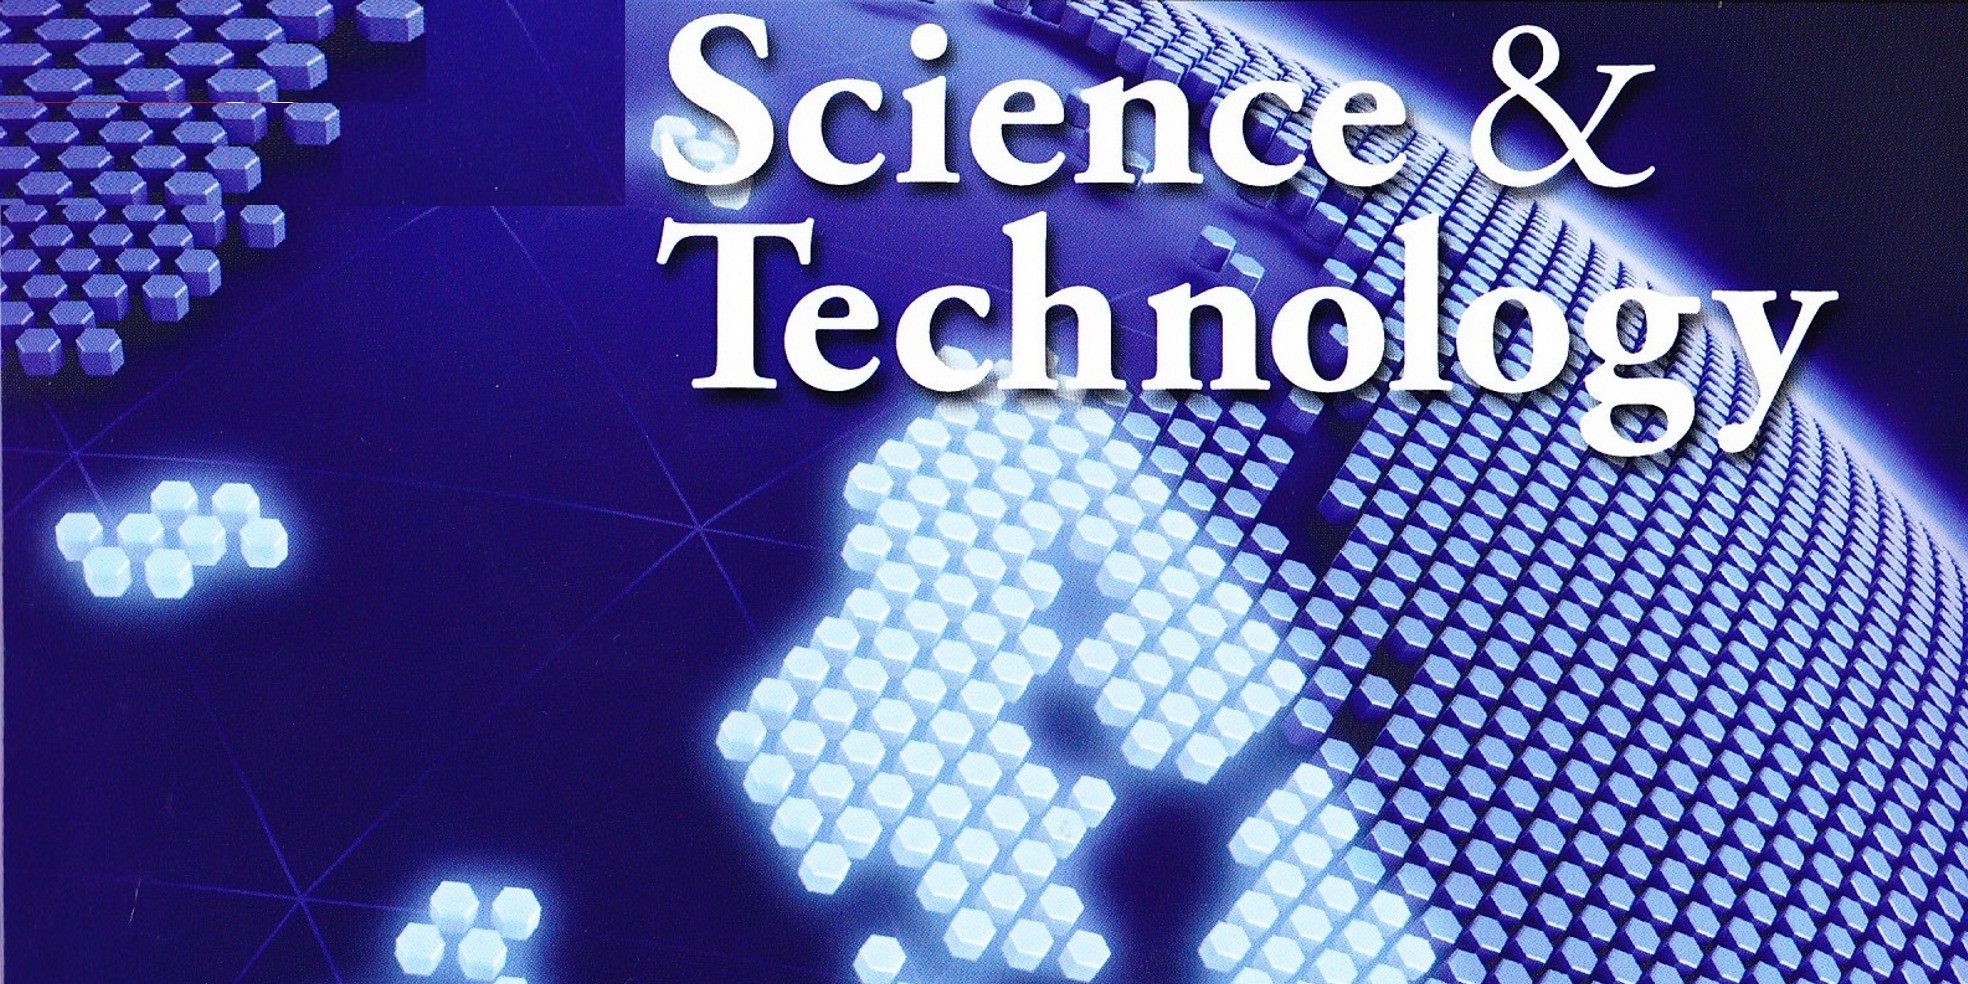 Science And Technology Image - technology